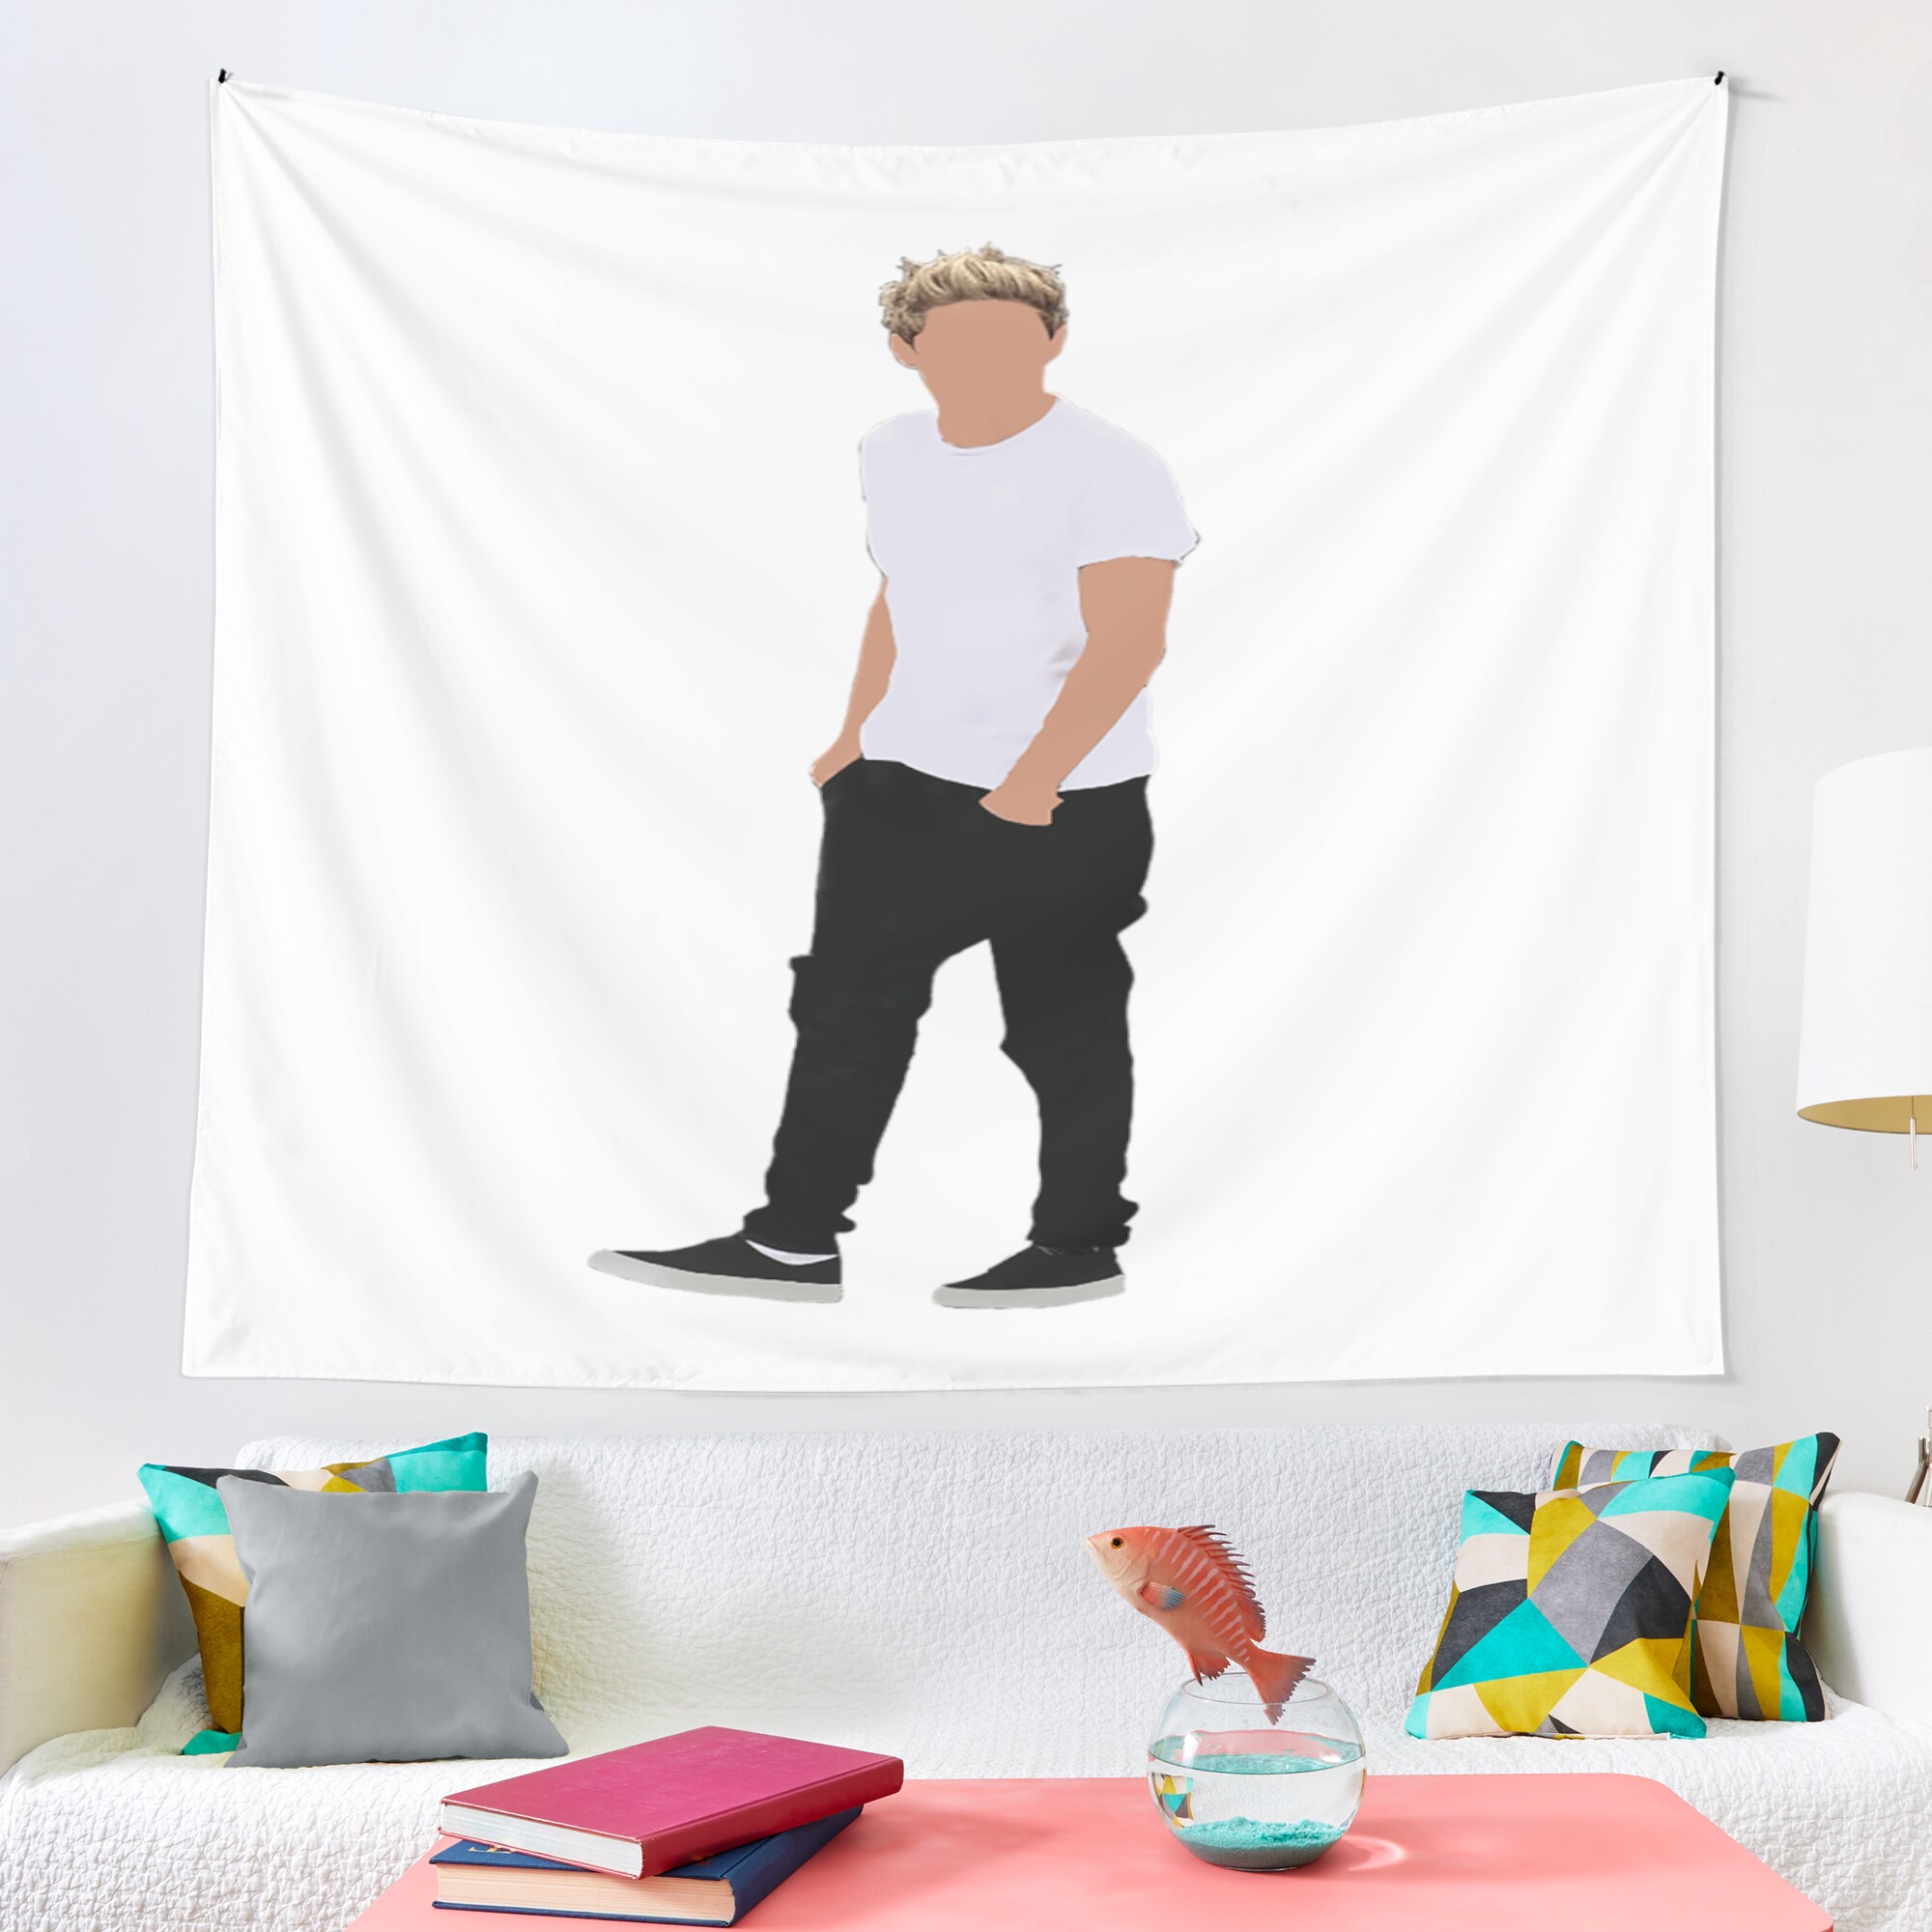 urtapestry lifestyle largesquare2000x2000 12 - Niall Horan Shop